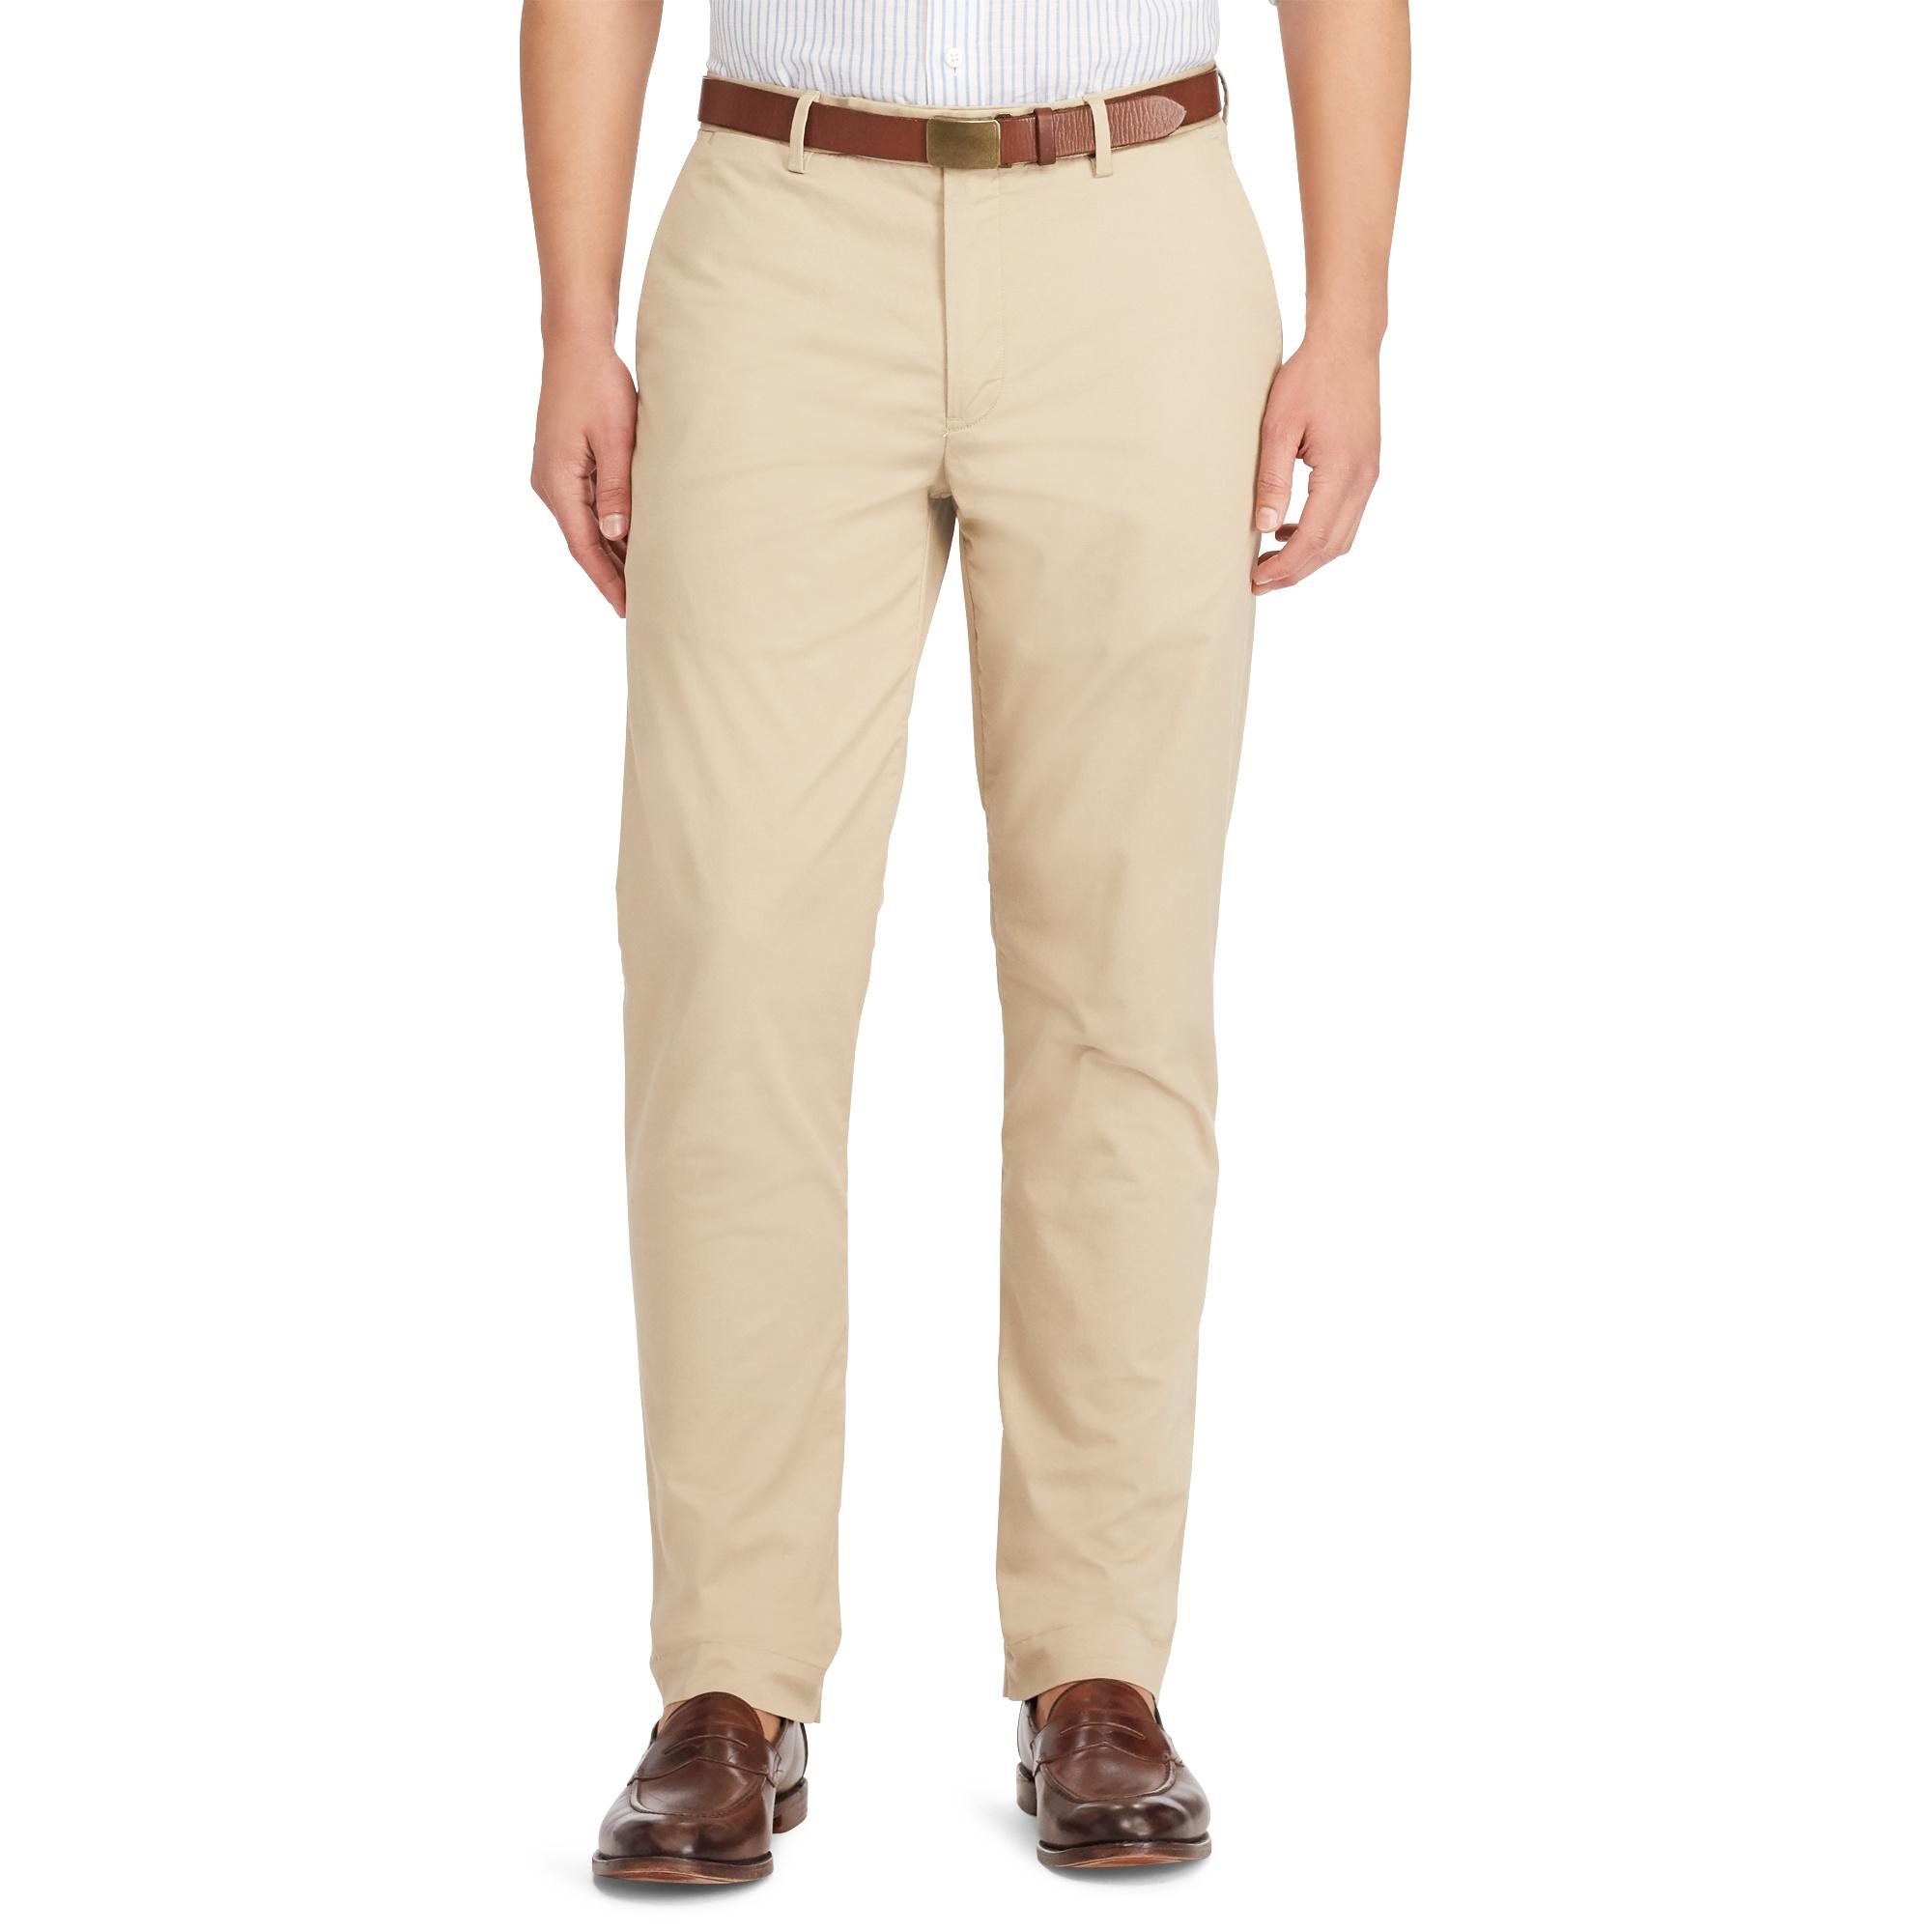 Polo Ralph Lauren Stretch Straight Fit Chino in Natural for Men - Lyst